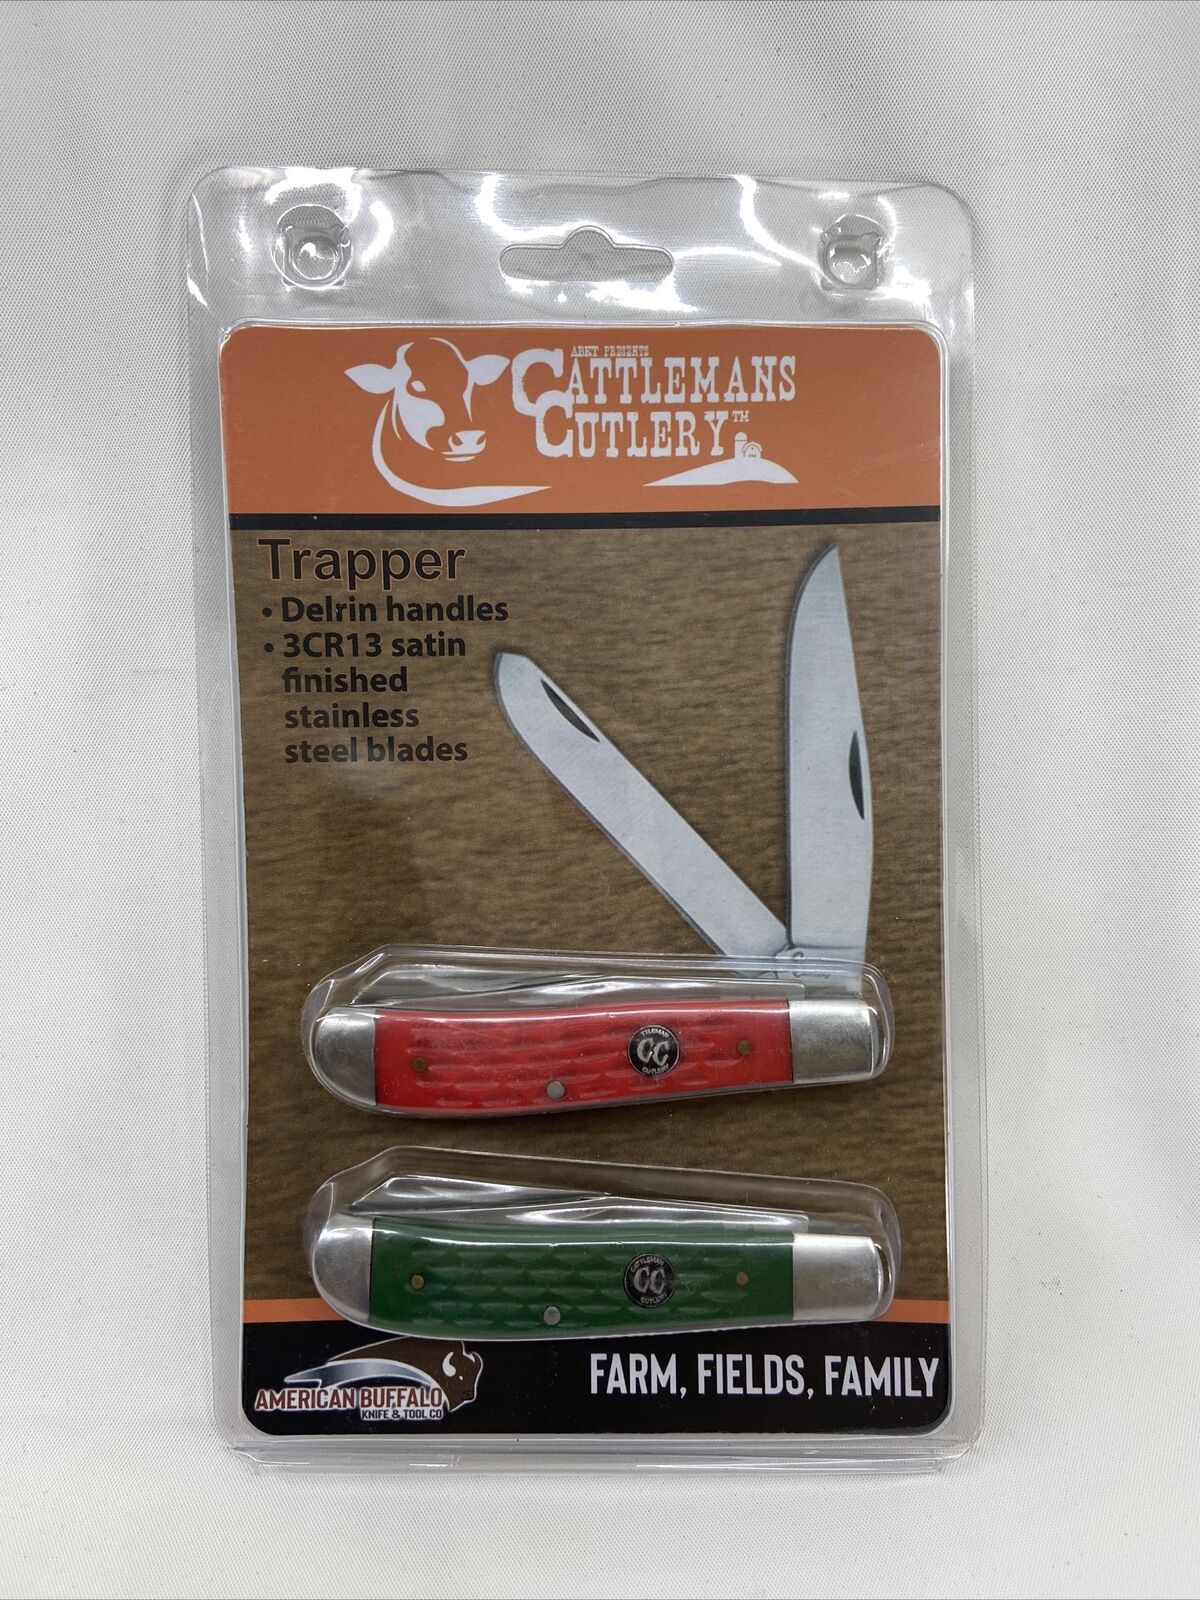 Pack of 2 Signature Trapper Folding Knifes Cattleman's Cutlery 3CR13 Stainless